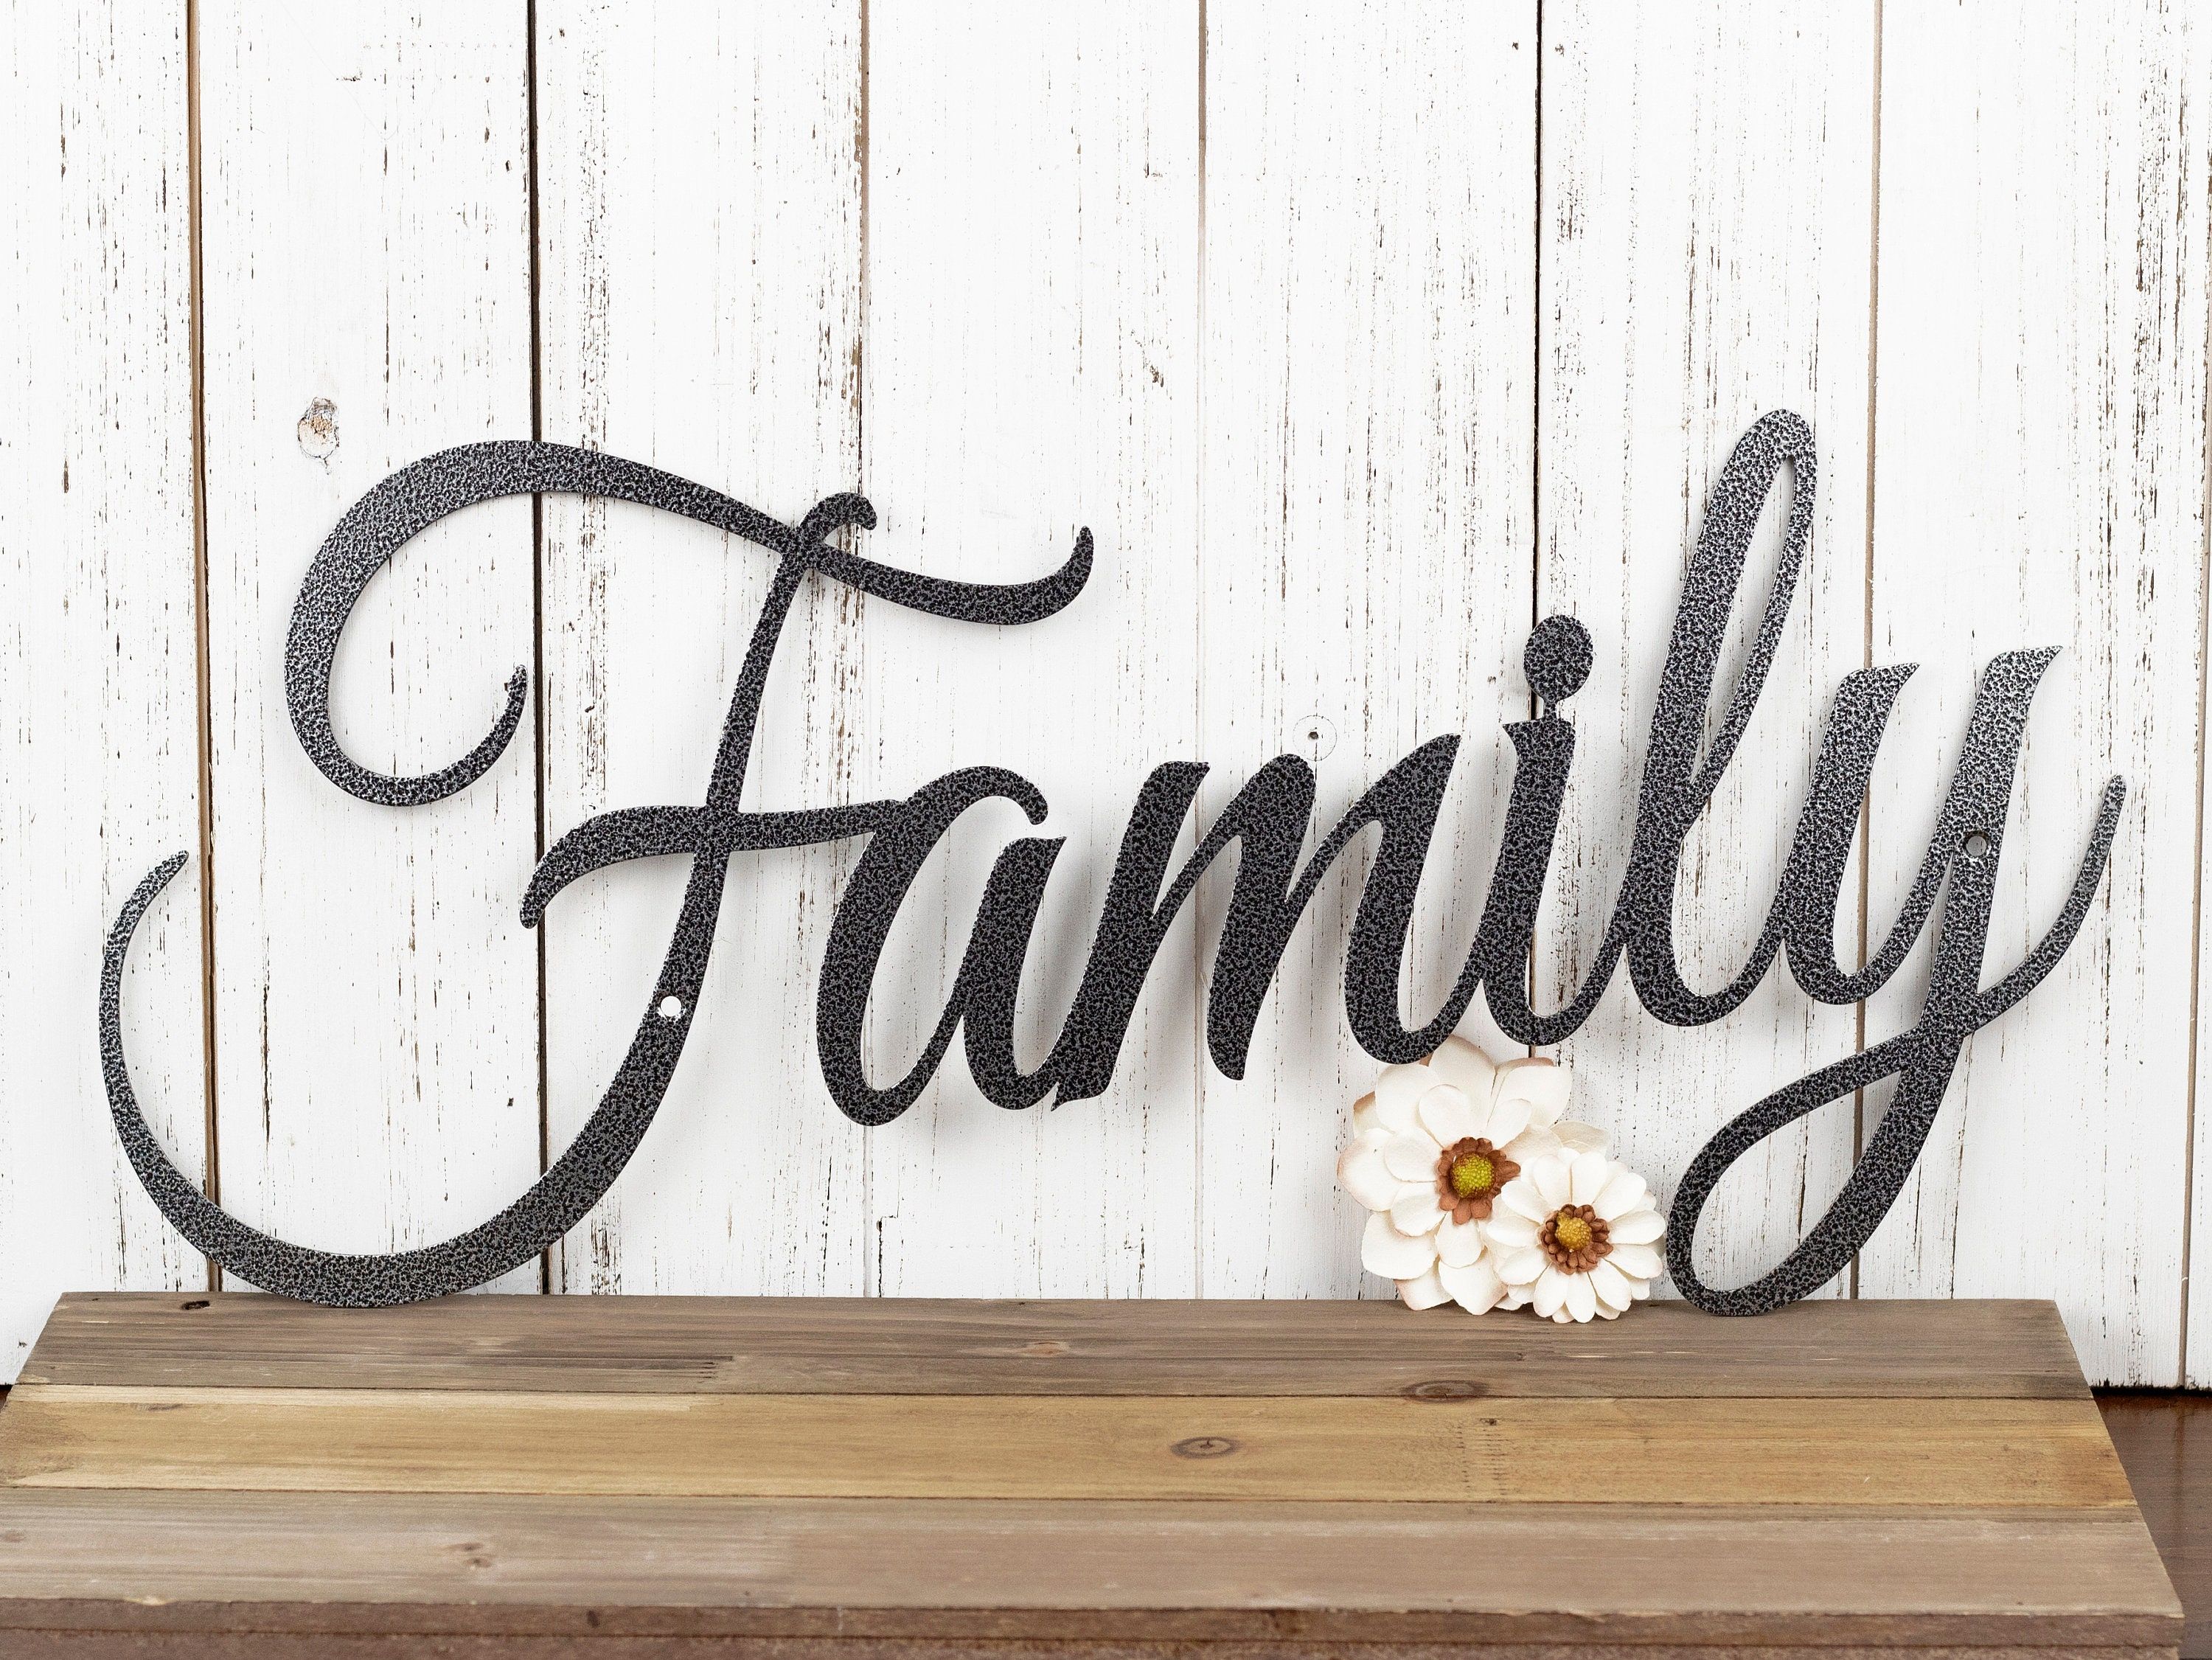 Family Metal Sign Metal Wall Art Wall Hanging Metal Wall – Etsy With Regard To Latest Family Wall Sign Metal (Gallery 1 of 20)